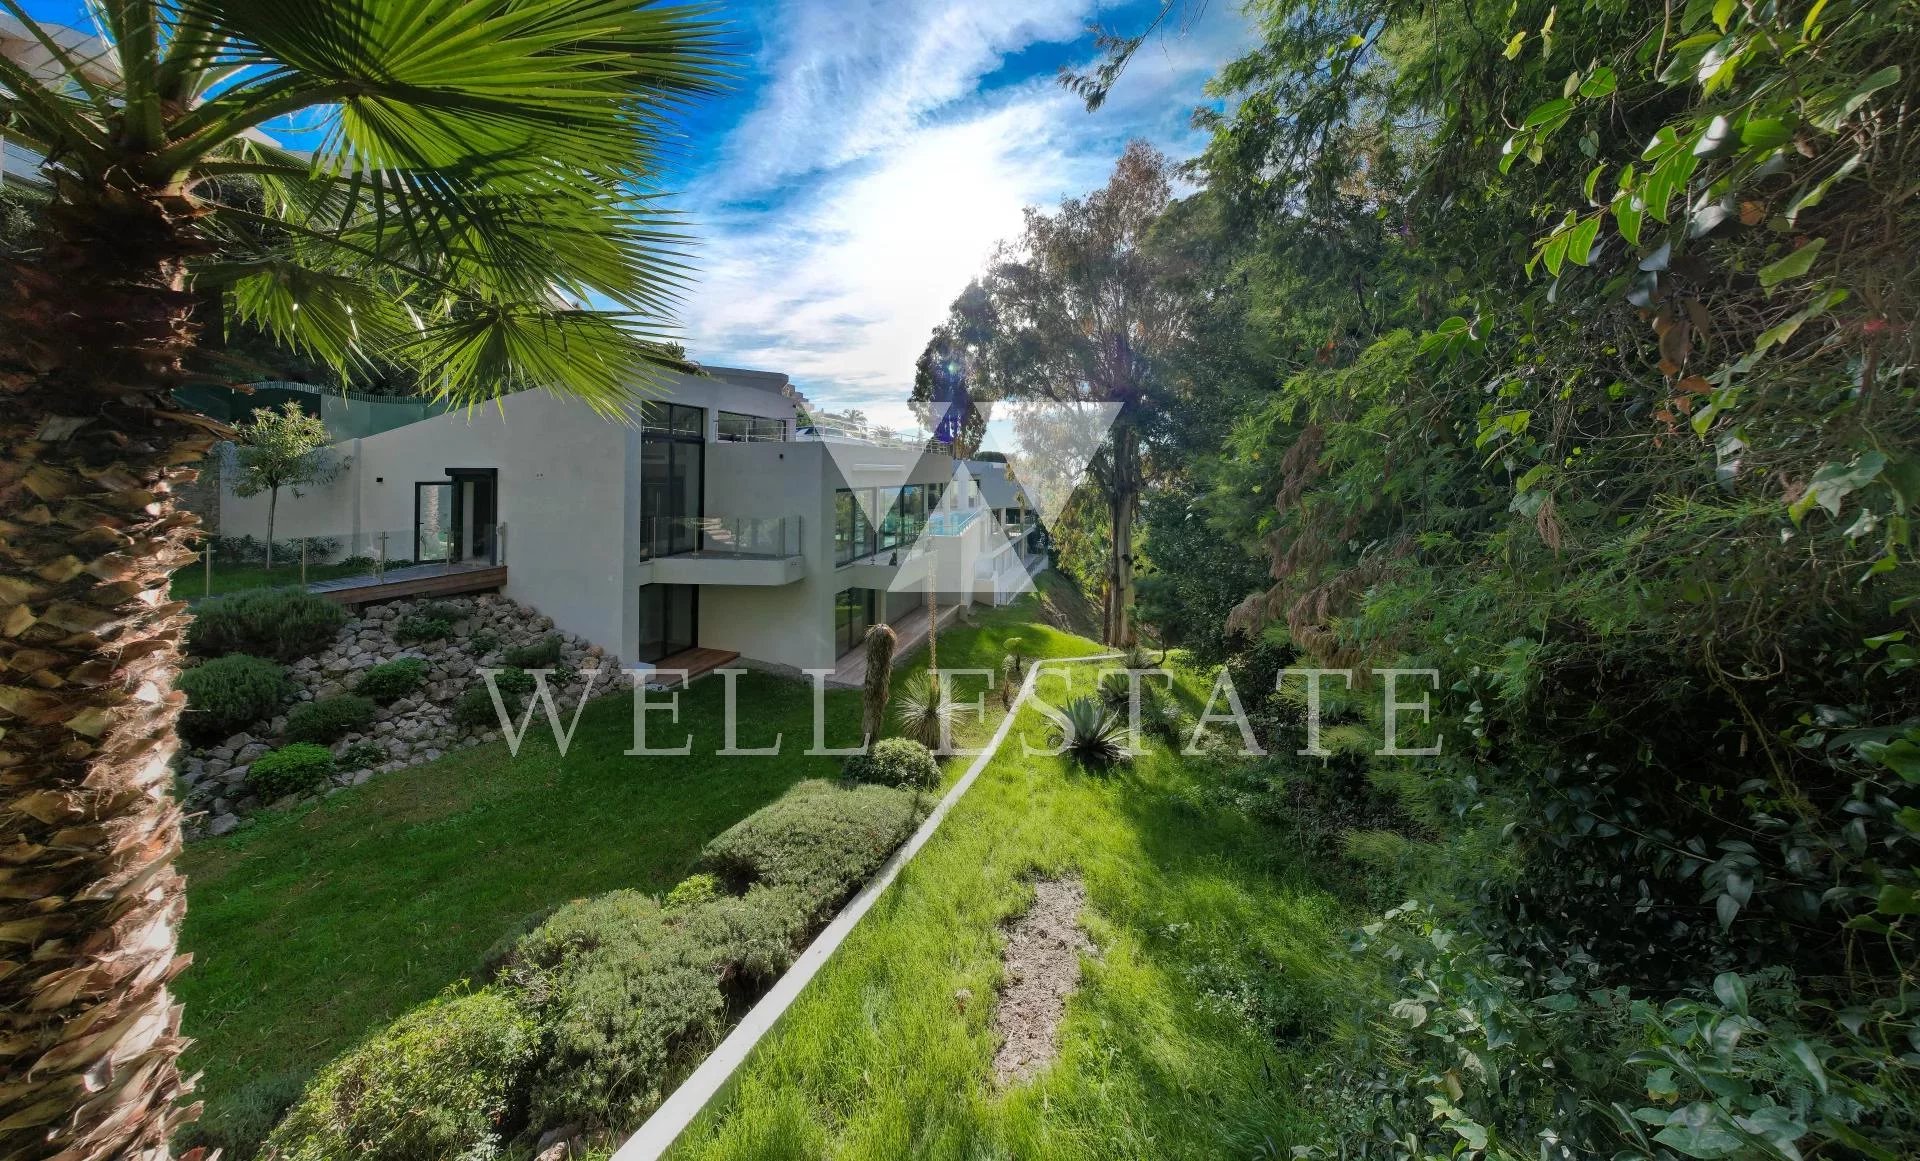 CANNES STYLISH  500M2 CONTEMPORARY VILLA WITH 6 BEDROOMS AND HEATED INFINITY POOL